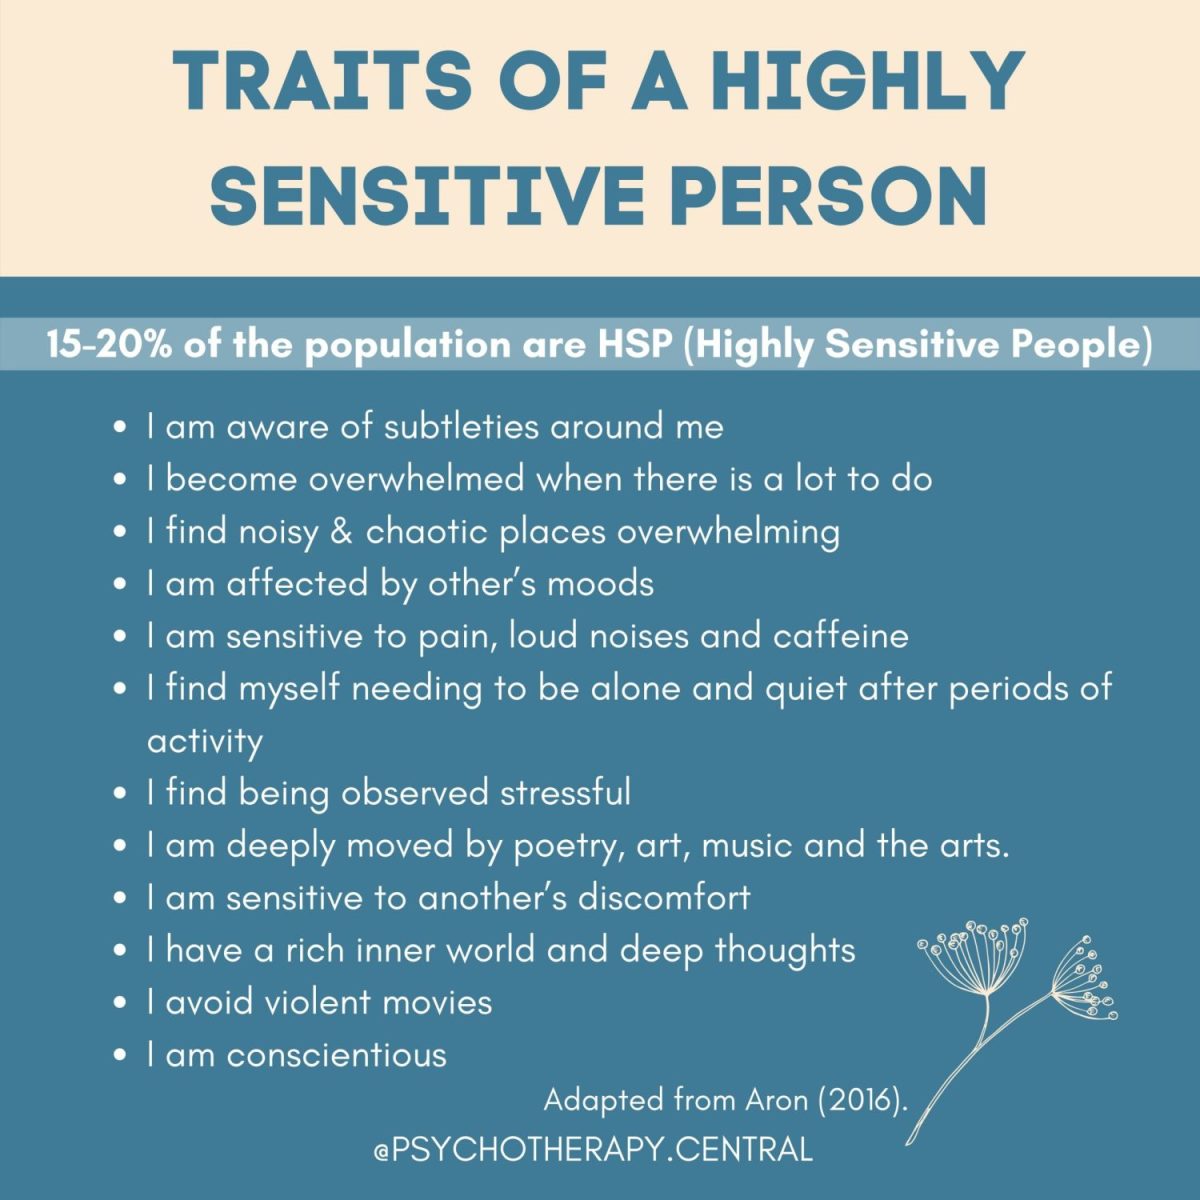 How Do Highly Sensitive People Manage in Relationships